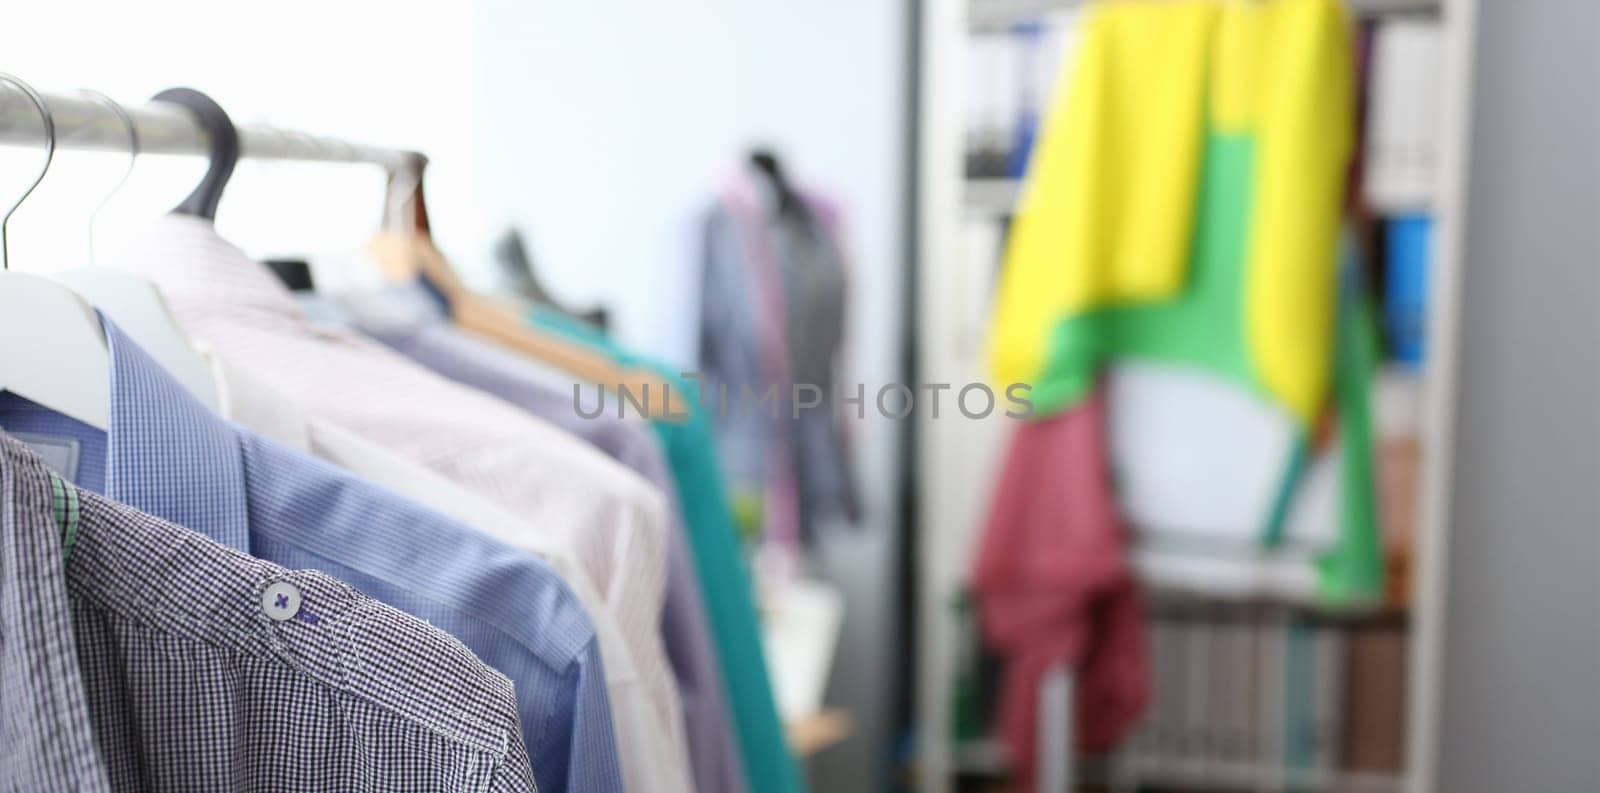 Fashion Creative Clothes Design Studio Concept. Fashionable Trendy Dress on Hangers. Various Colors Man Shirts Collection Hanging on Rack. Empty Dressmaking Workplace Cozy Interior